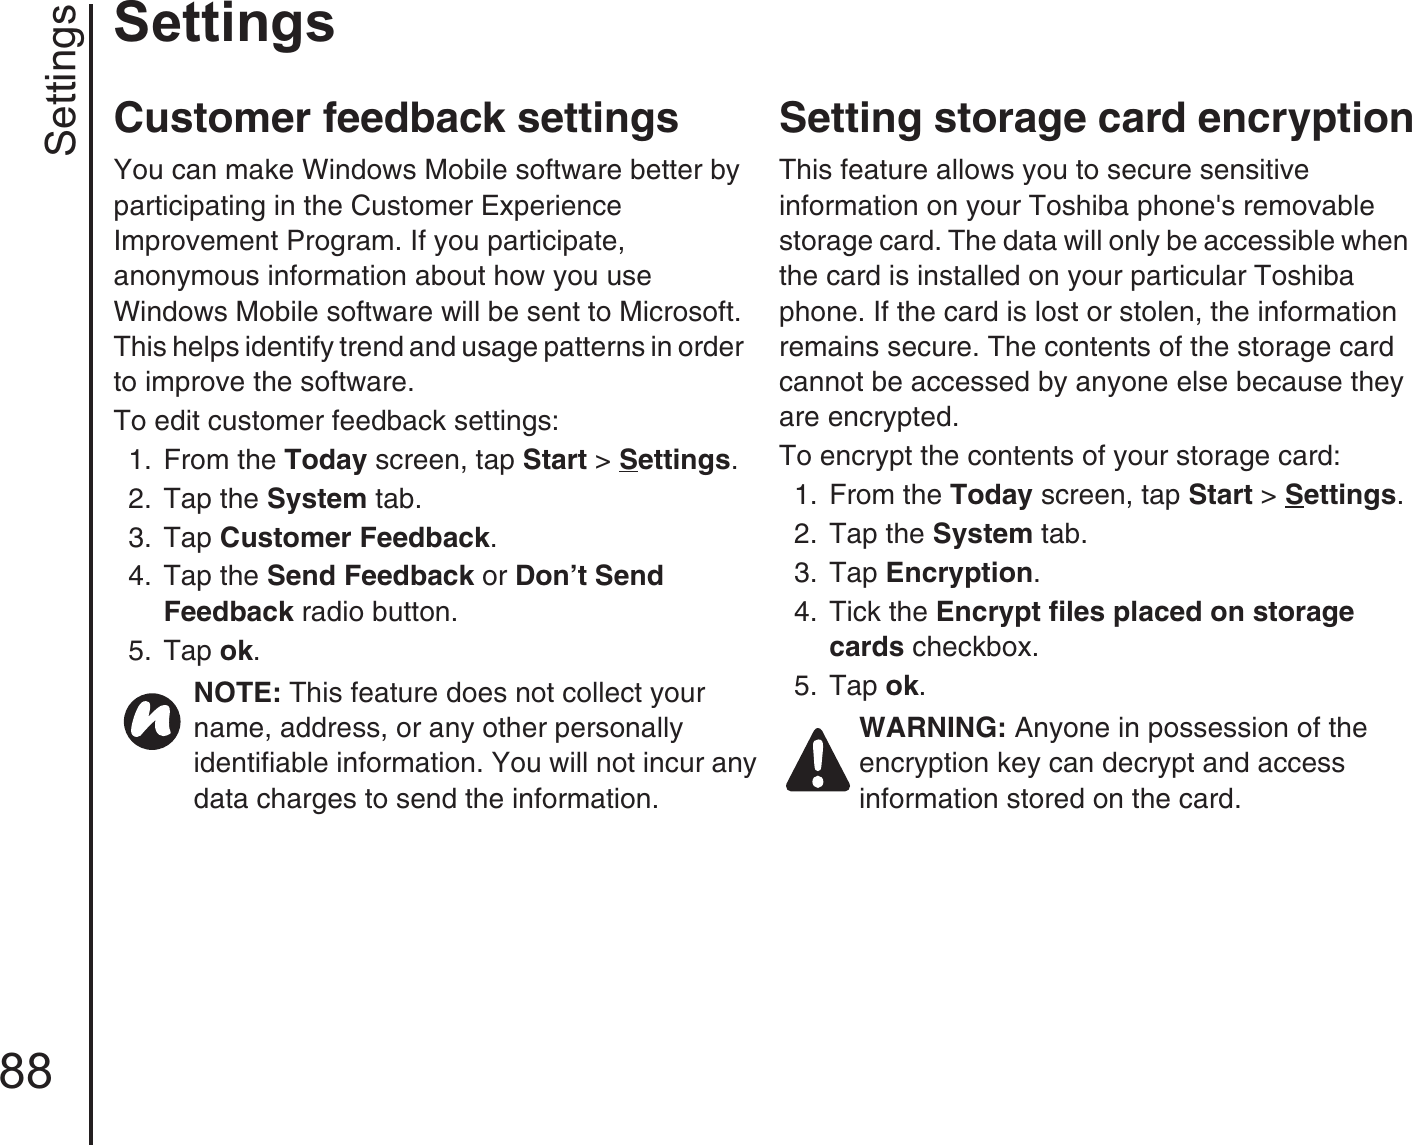 Settings88SettingsCustomer feedback settingsYou can make Windows Mobile software better by participating in the Customer Experience Improvement Program. If you participate, anonymous information about how you use Windows Mobile software will be sent to Microsoft. This helps identify trend and usage patterns in order to improve the software.To edit customer feedback settings:1.  From the Today screen, tap Start &gt; Settings.2.  Tap the System tab.3.  Tap Customer Feedback. 4.  Tap the Send Feedback or Don’t Send Feedback radio button.5.  Tap ok.Setting storage card encryptionThis feature allows you to secure sensitive information on your Toshiba phone&apos;s removable storage card. The data will only be accessible when the card is installed on your particular Toshiba phone. If the card is lost or stolen, the information remains secure. The contents of the storage card cannot be accessed by anyone else because they are encrypted.To encrypt the contents of your storage card:1.  From the Today screen, tap Start &gt; Settings.2.  Tap the System tab.3.  Tap Encryption. 4.  Tick the Encrypt files placed on storage cards checkbox.5.  Tap ok.NOTE: This feature does not collect your name, address, or any other personally identifiable information. You will not incur any data charges to send the information.WARNING: Anyone in possession of the encryption key can decrypt and access information stored on the card.